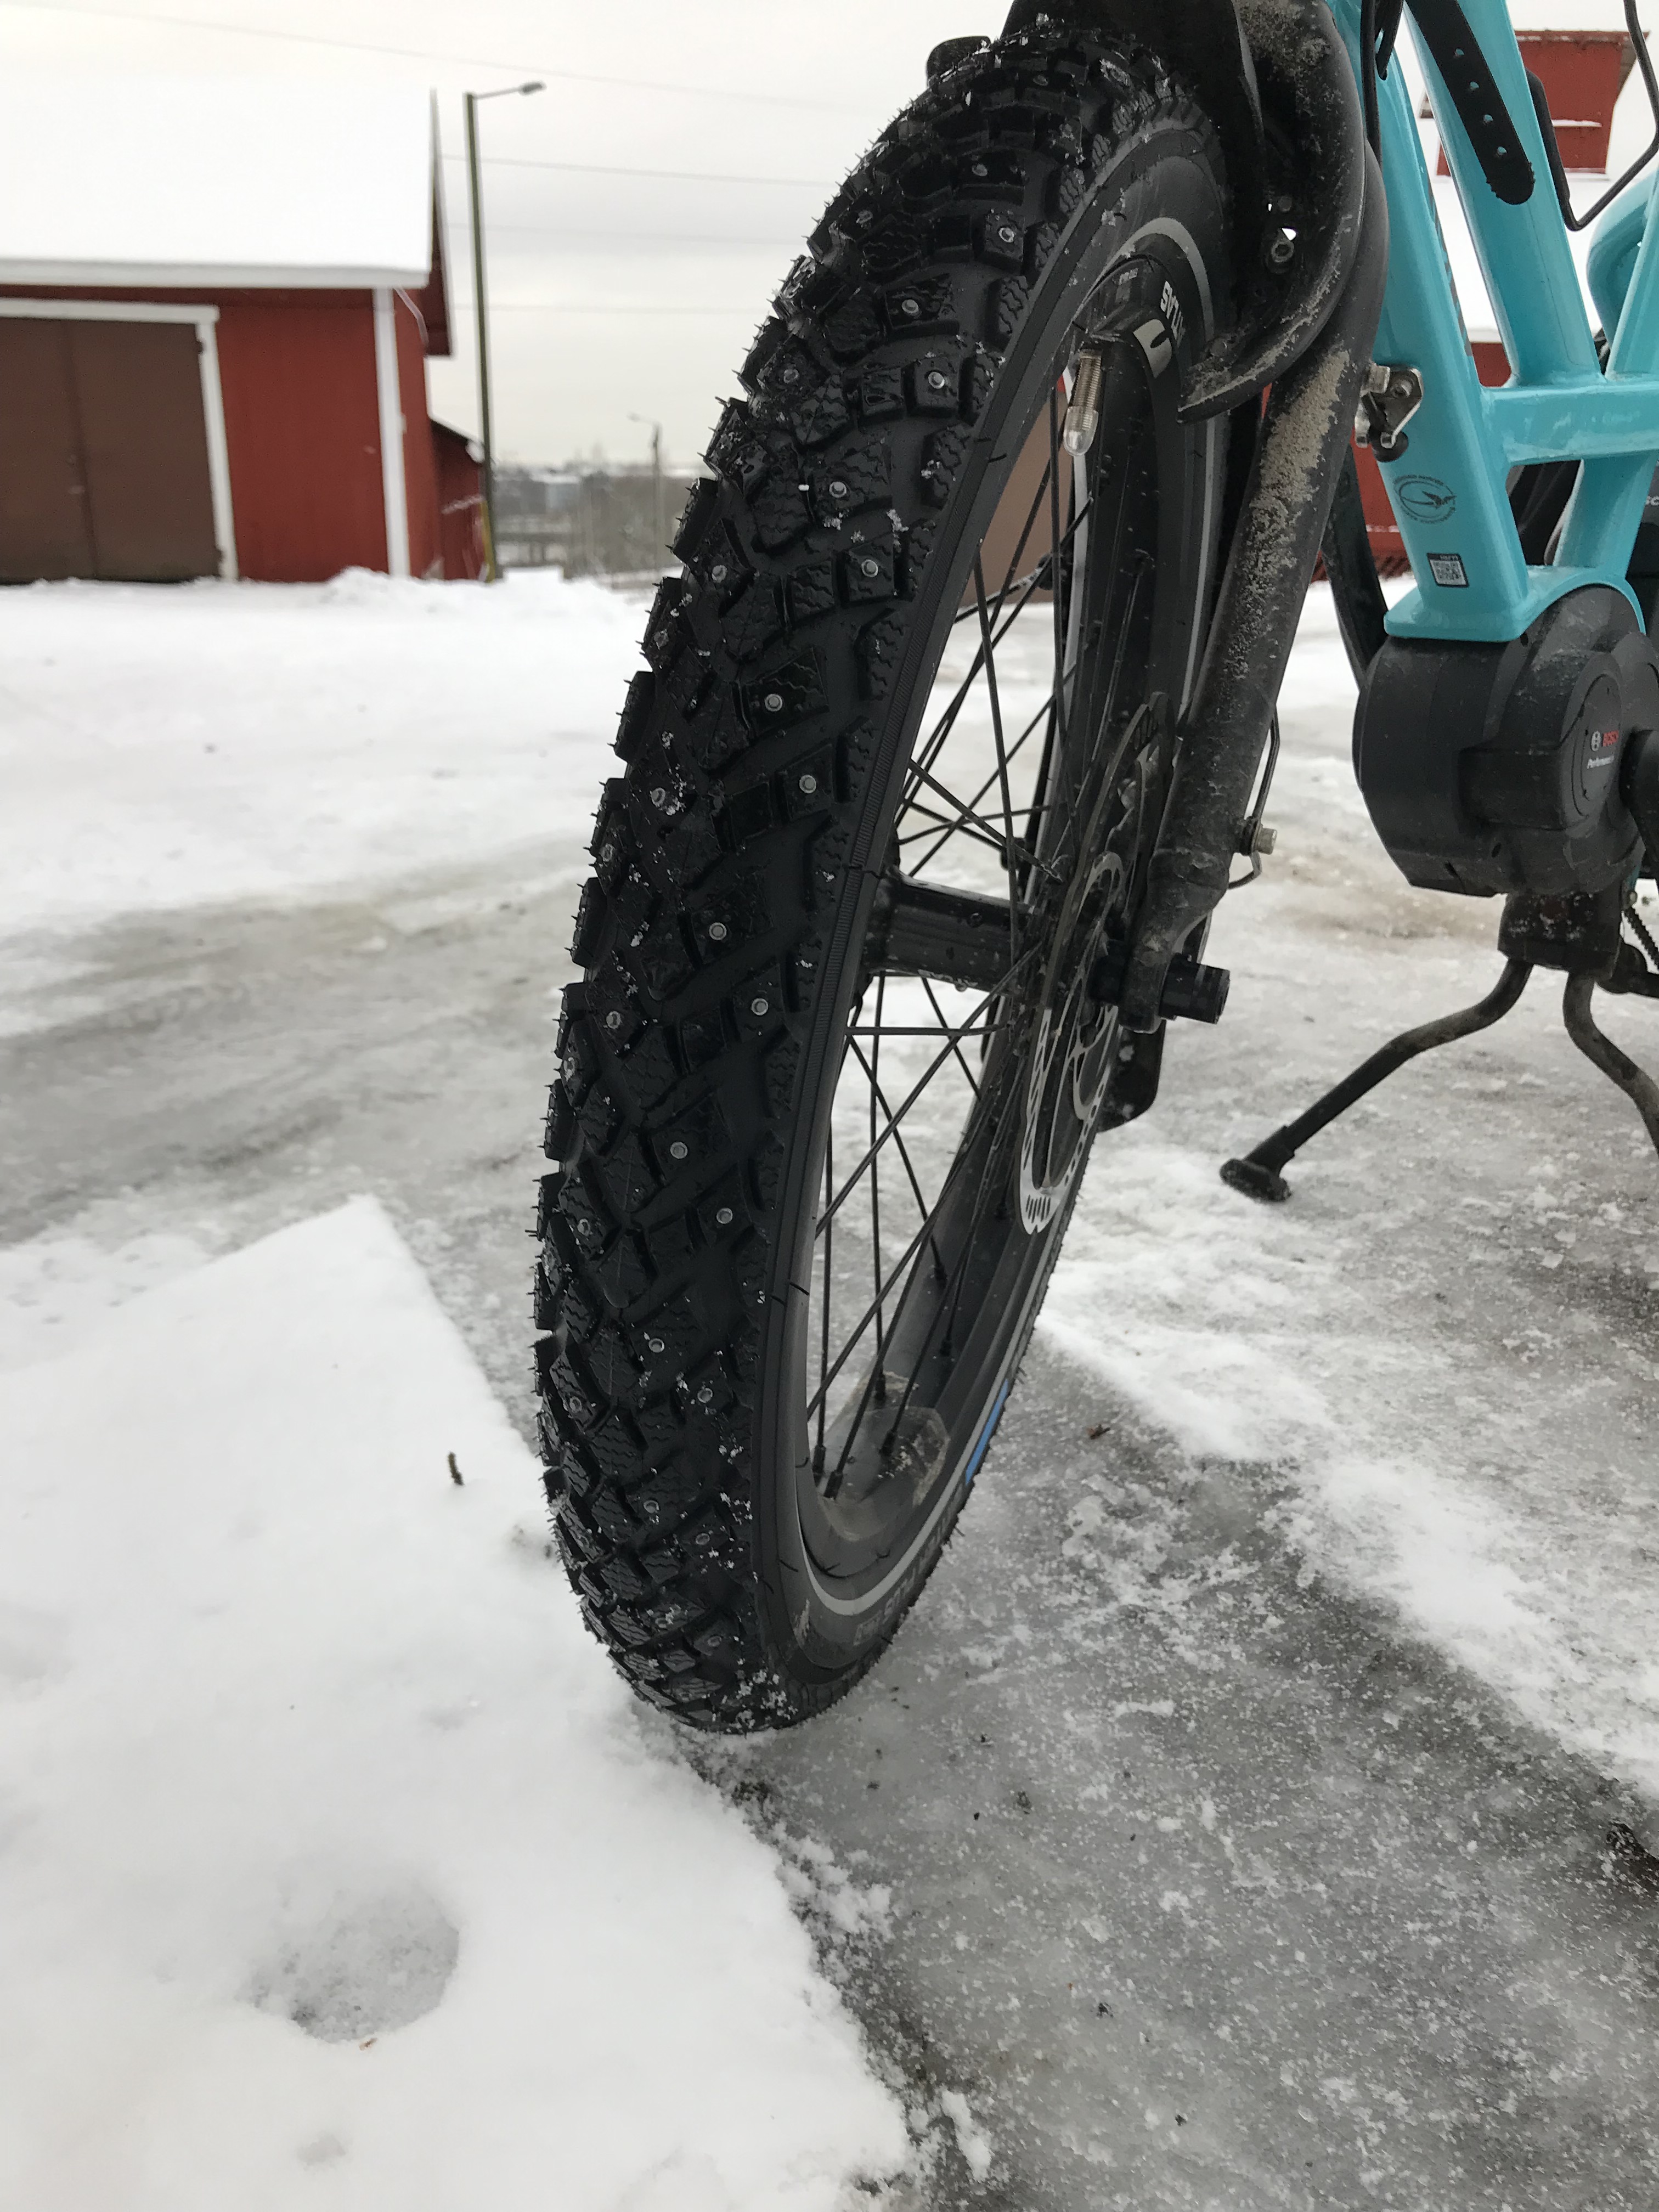 Studded tires give you extra control on slick surfaces